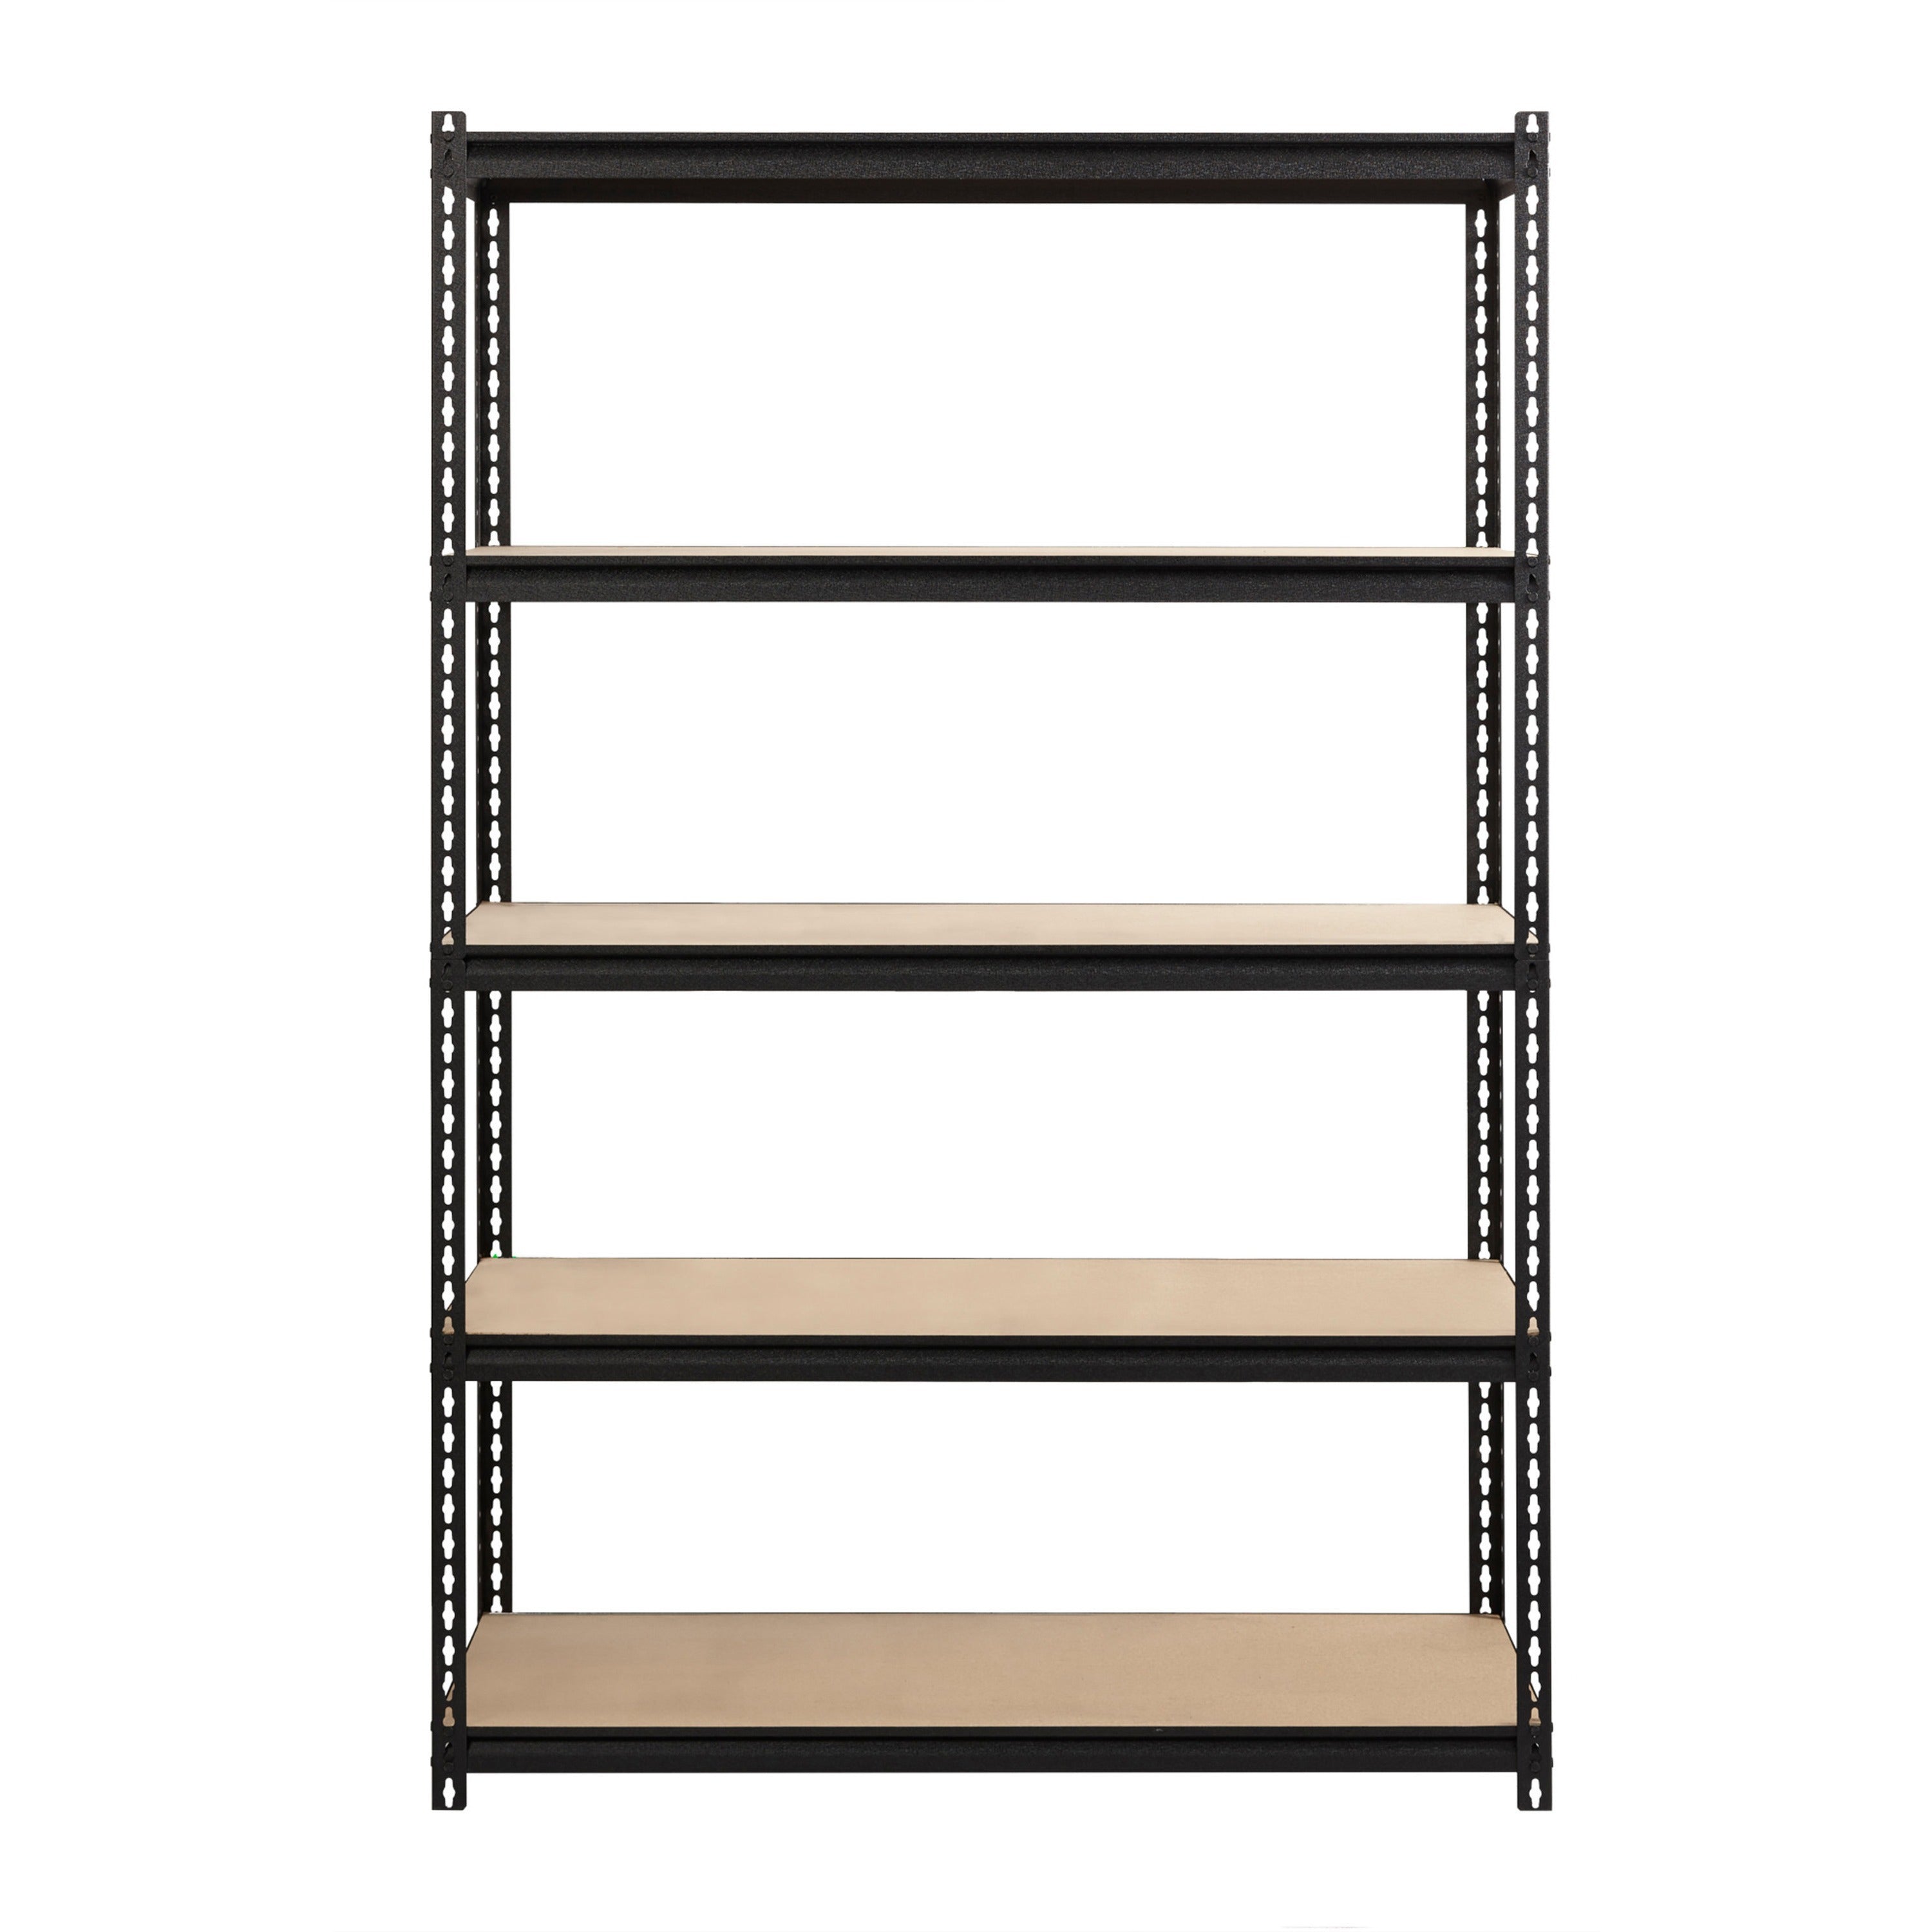 lorell-iron-horse-2300-lb-capacity-riveted-shelving-5-shelfves-72-height-x-48-width-x-18-depth-30%-recycled-black-steel-particleboard-1-each_llr59698 - 2